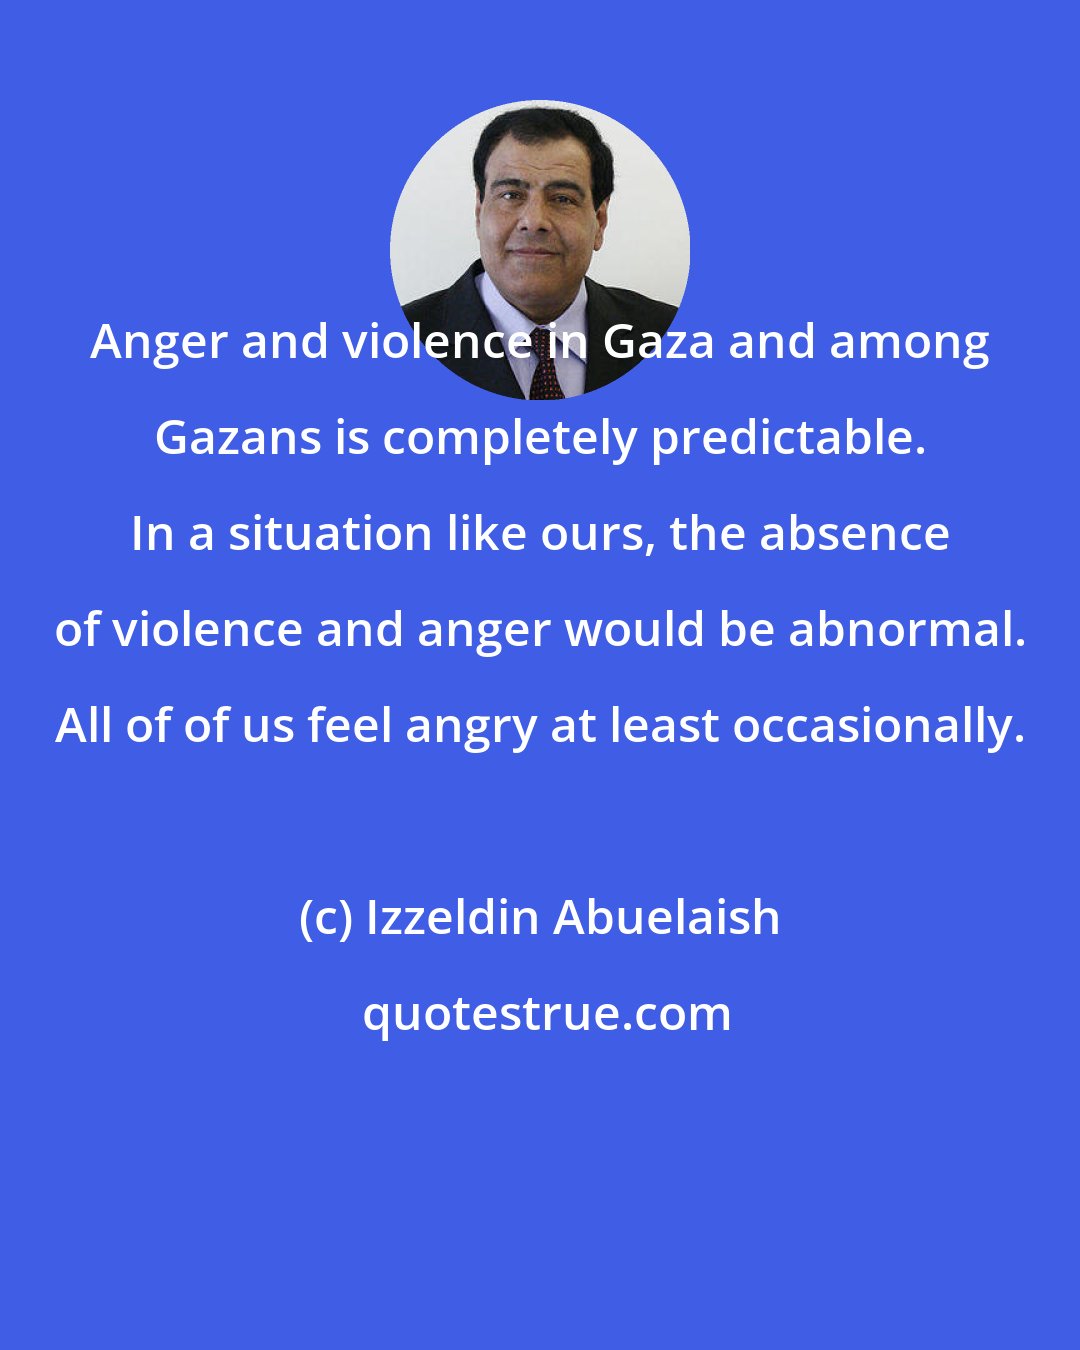 Izzeldin Abuelaish: Anger and violence in Gaza and among Gazans is completely predictable. In a situation like ours, the absence of violence and anger would be abnormal. All of of us feel angry at least occasionally.